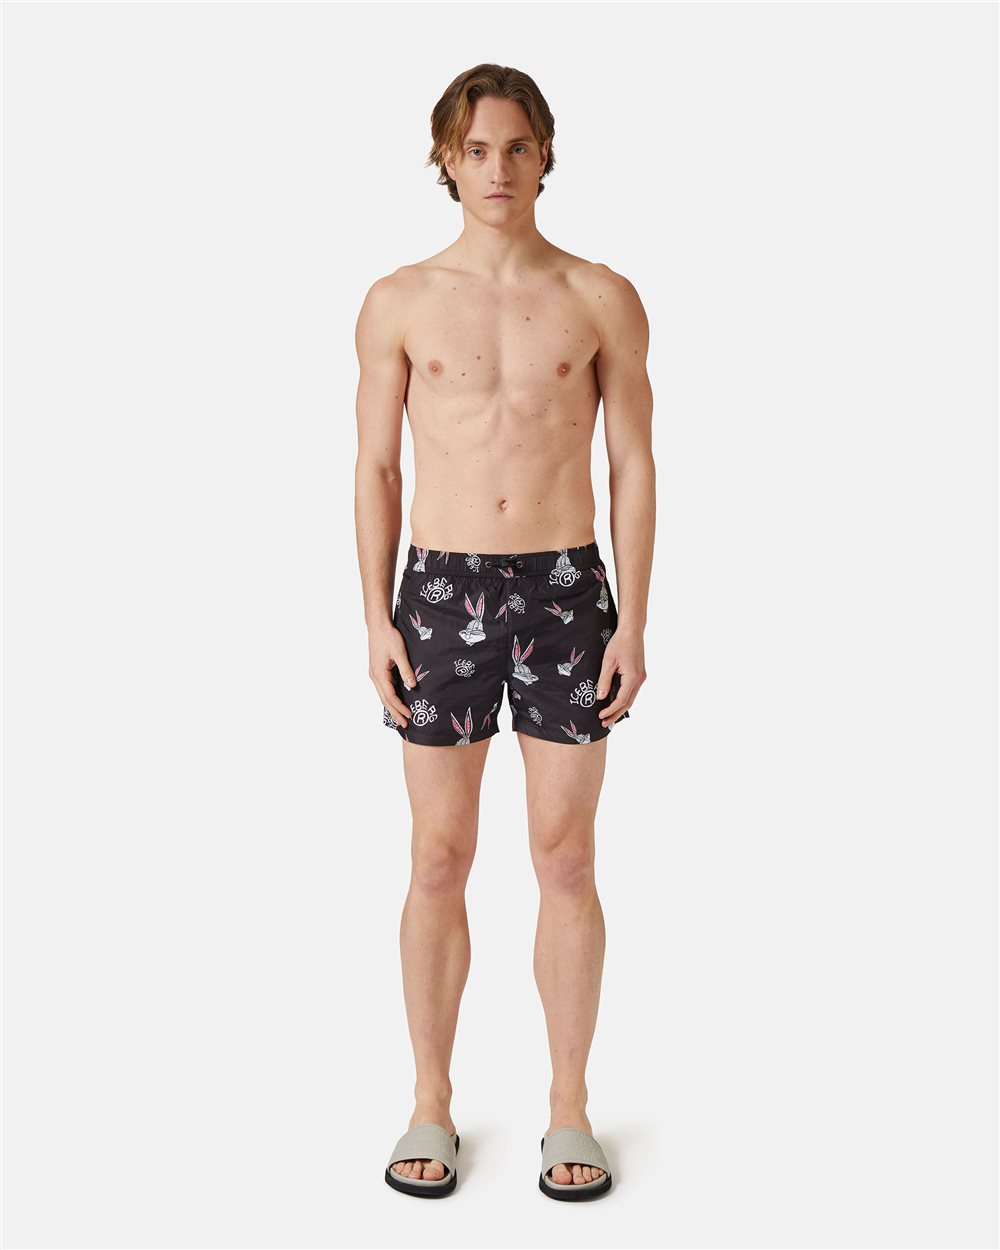 Swim shorts with logo and cartoon graphics - Iceberg - Official Website